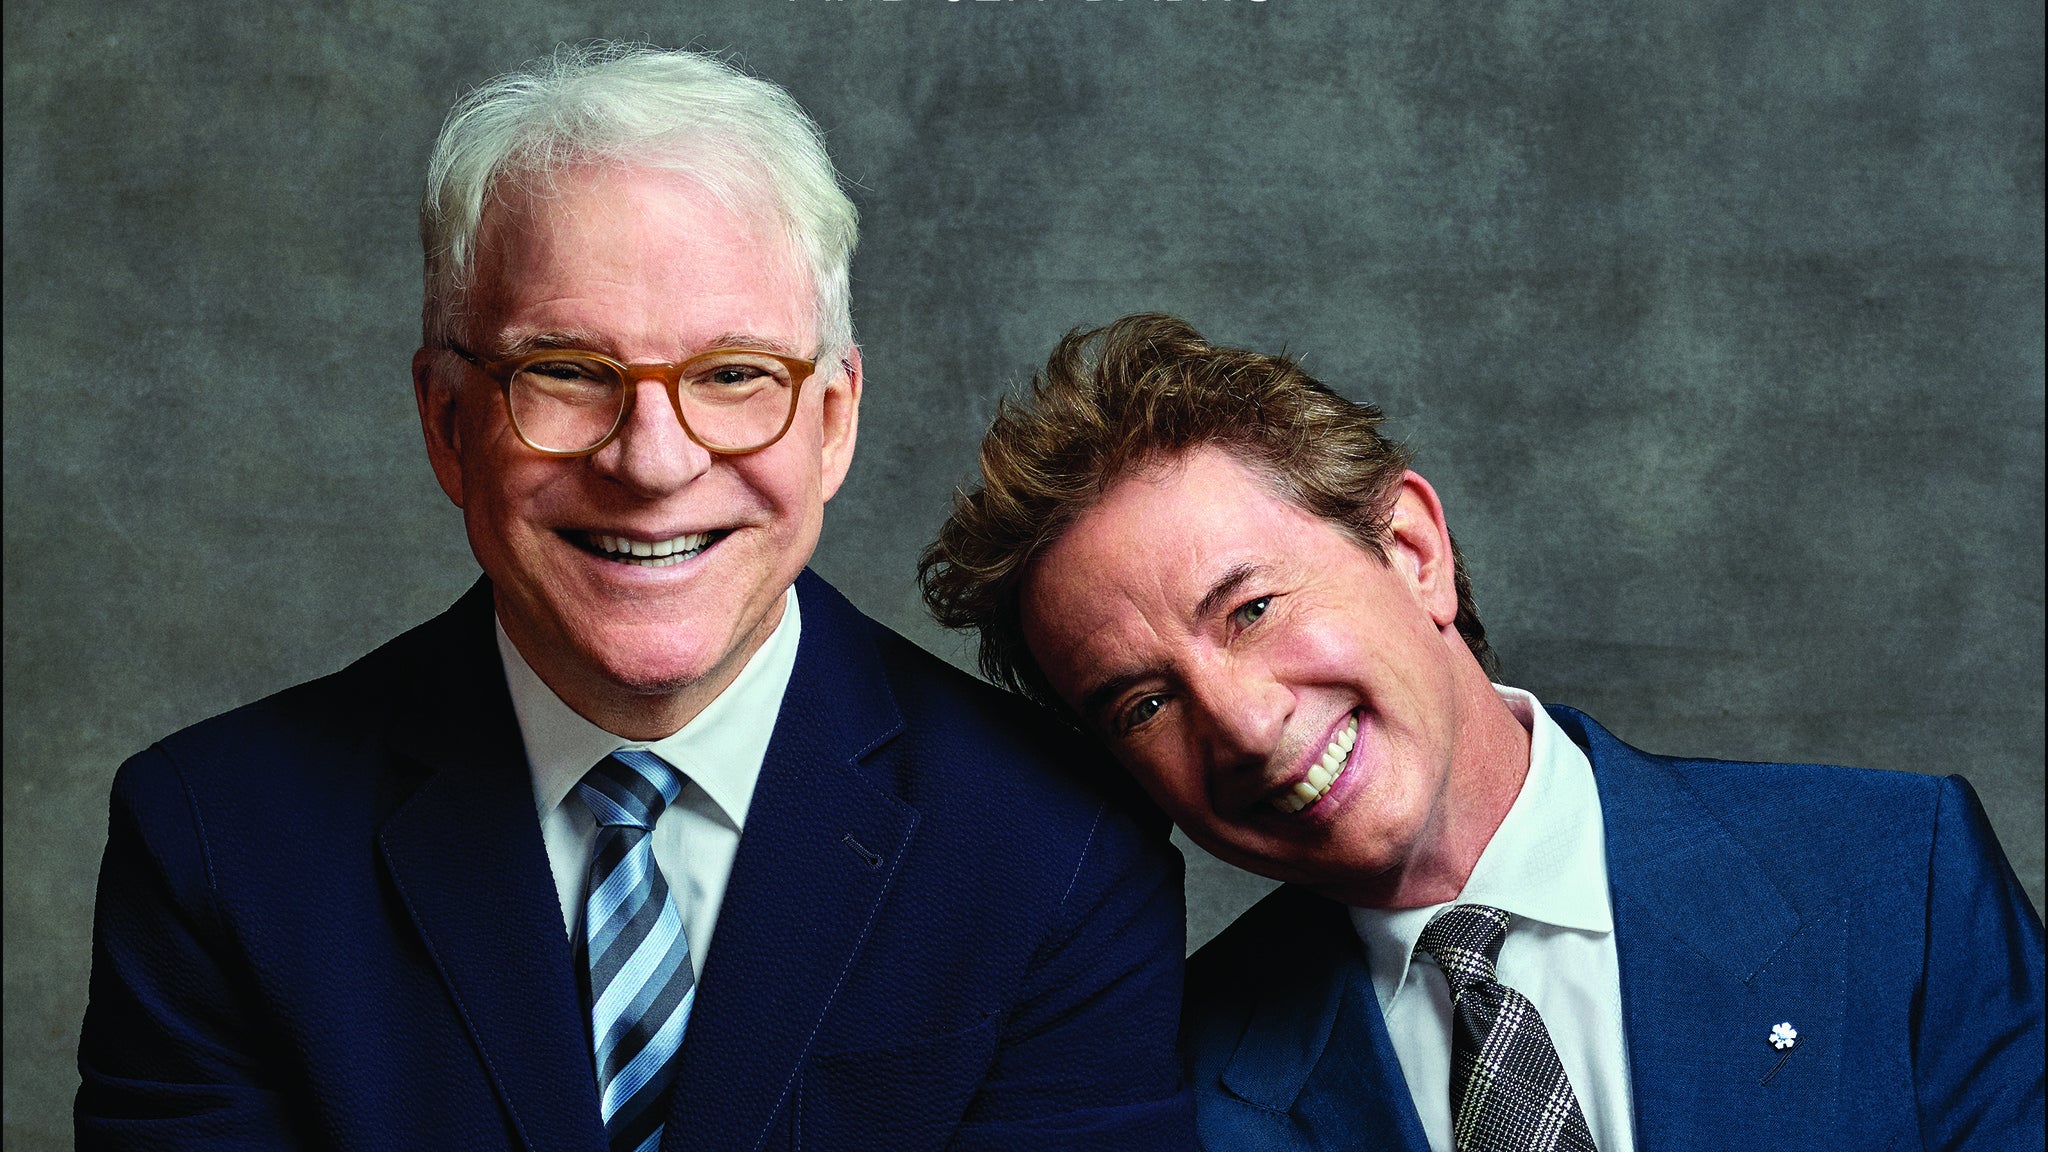 We’ve Got Your Tickets to See Steve Martin & Martin Short in Gilford